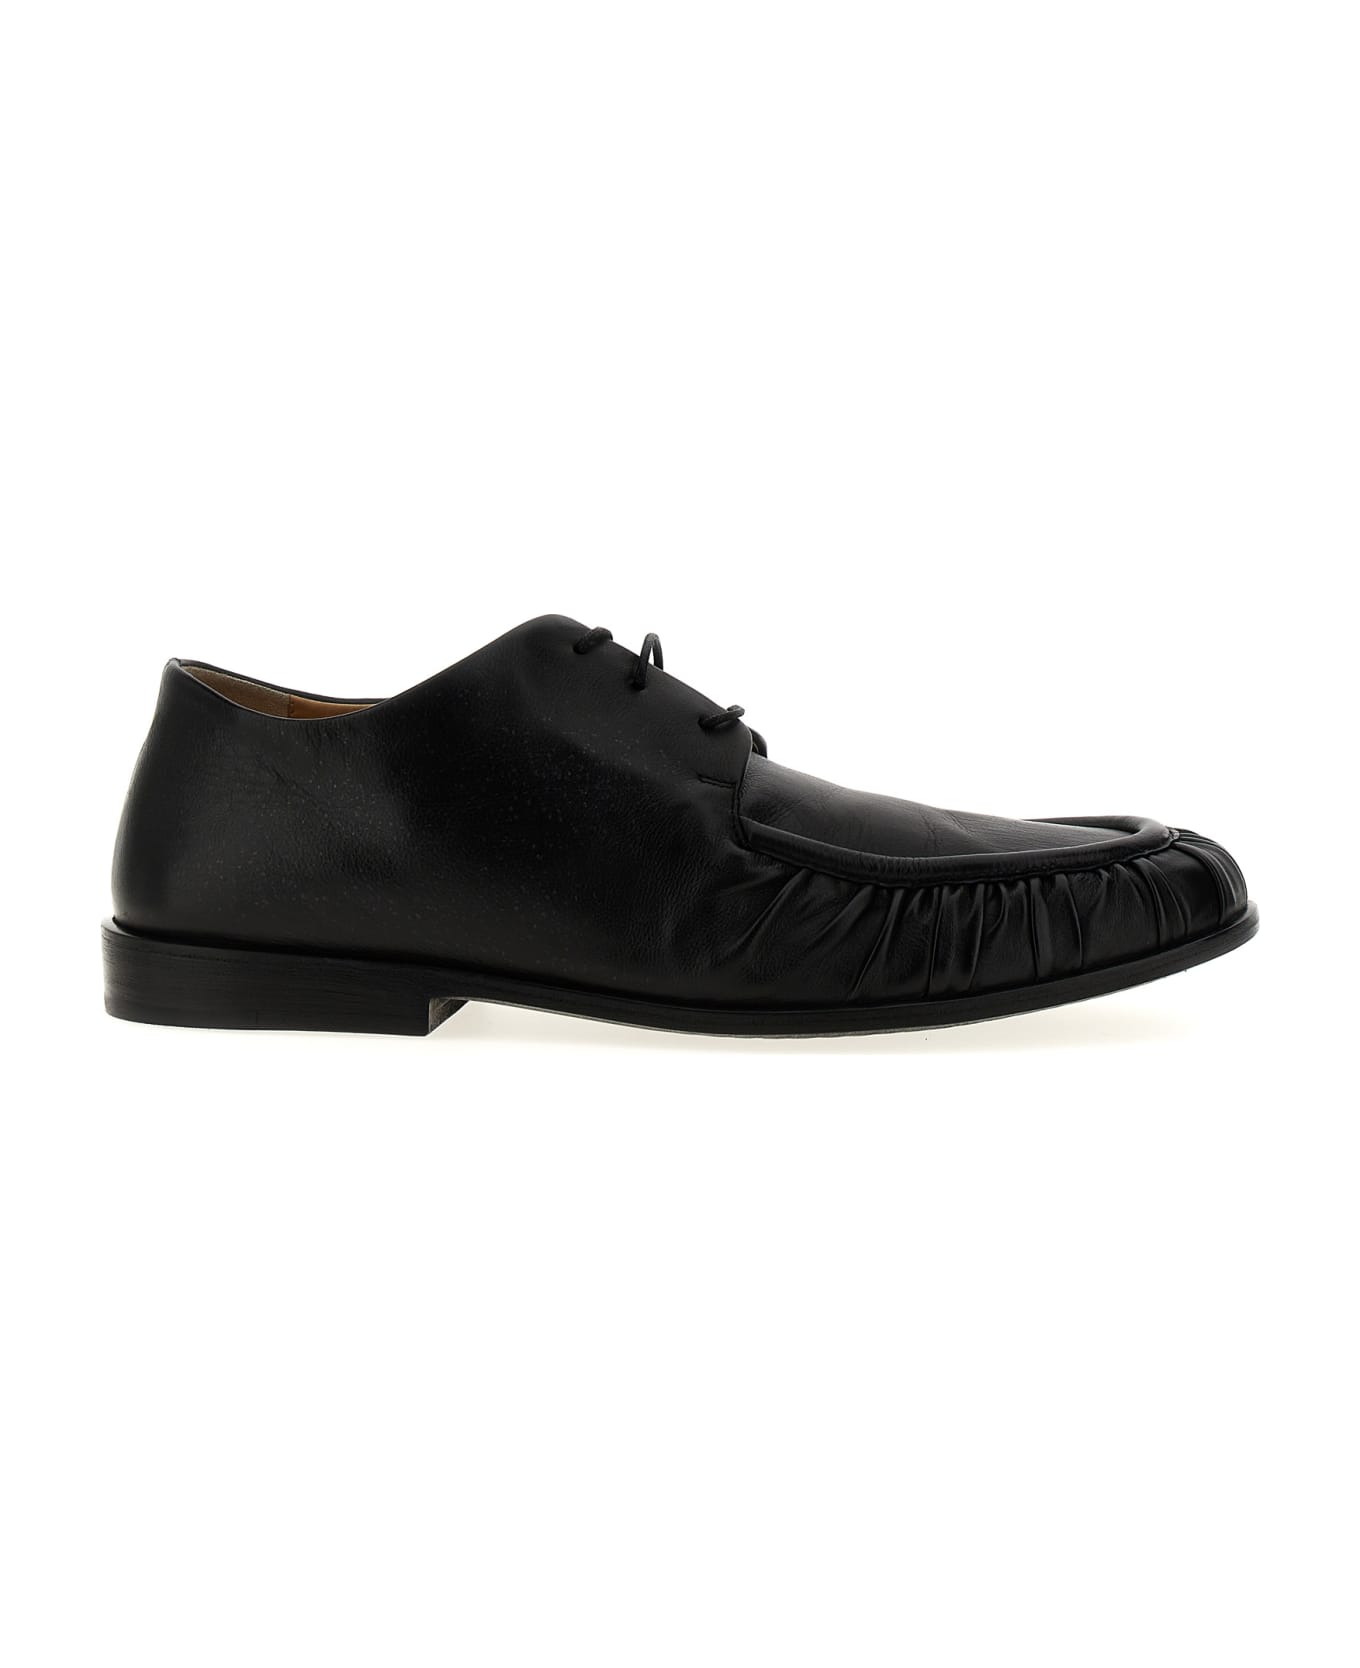 Marsell 'mocassino' Lace Up Shoes - Black   ローファー＆デッキシューズ